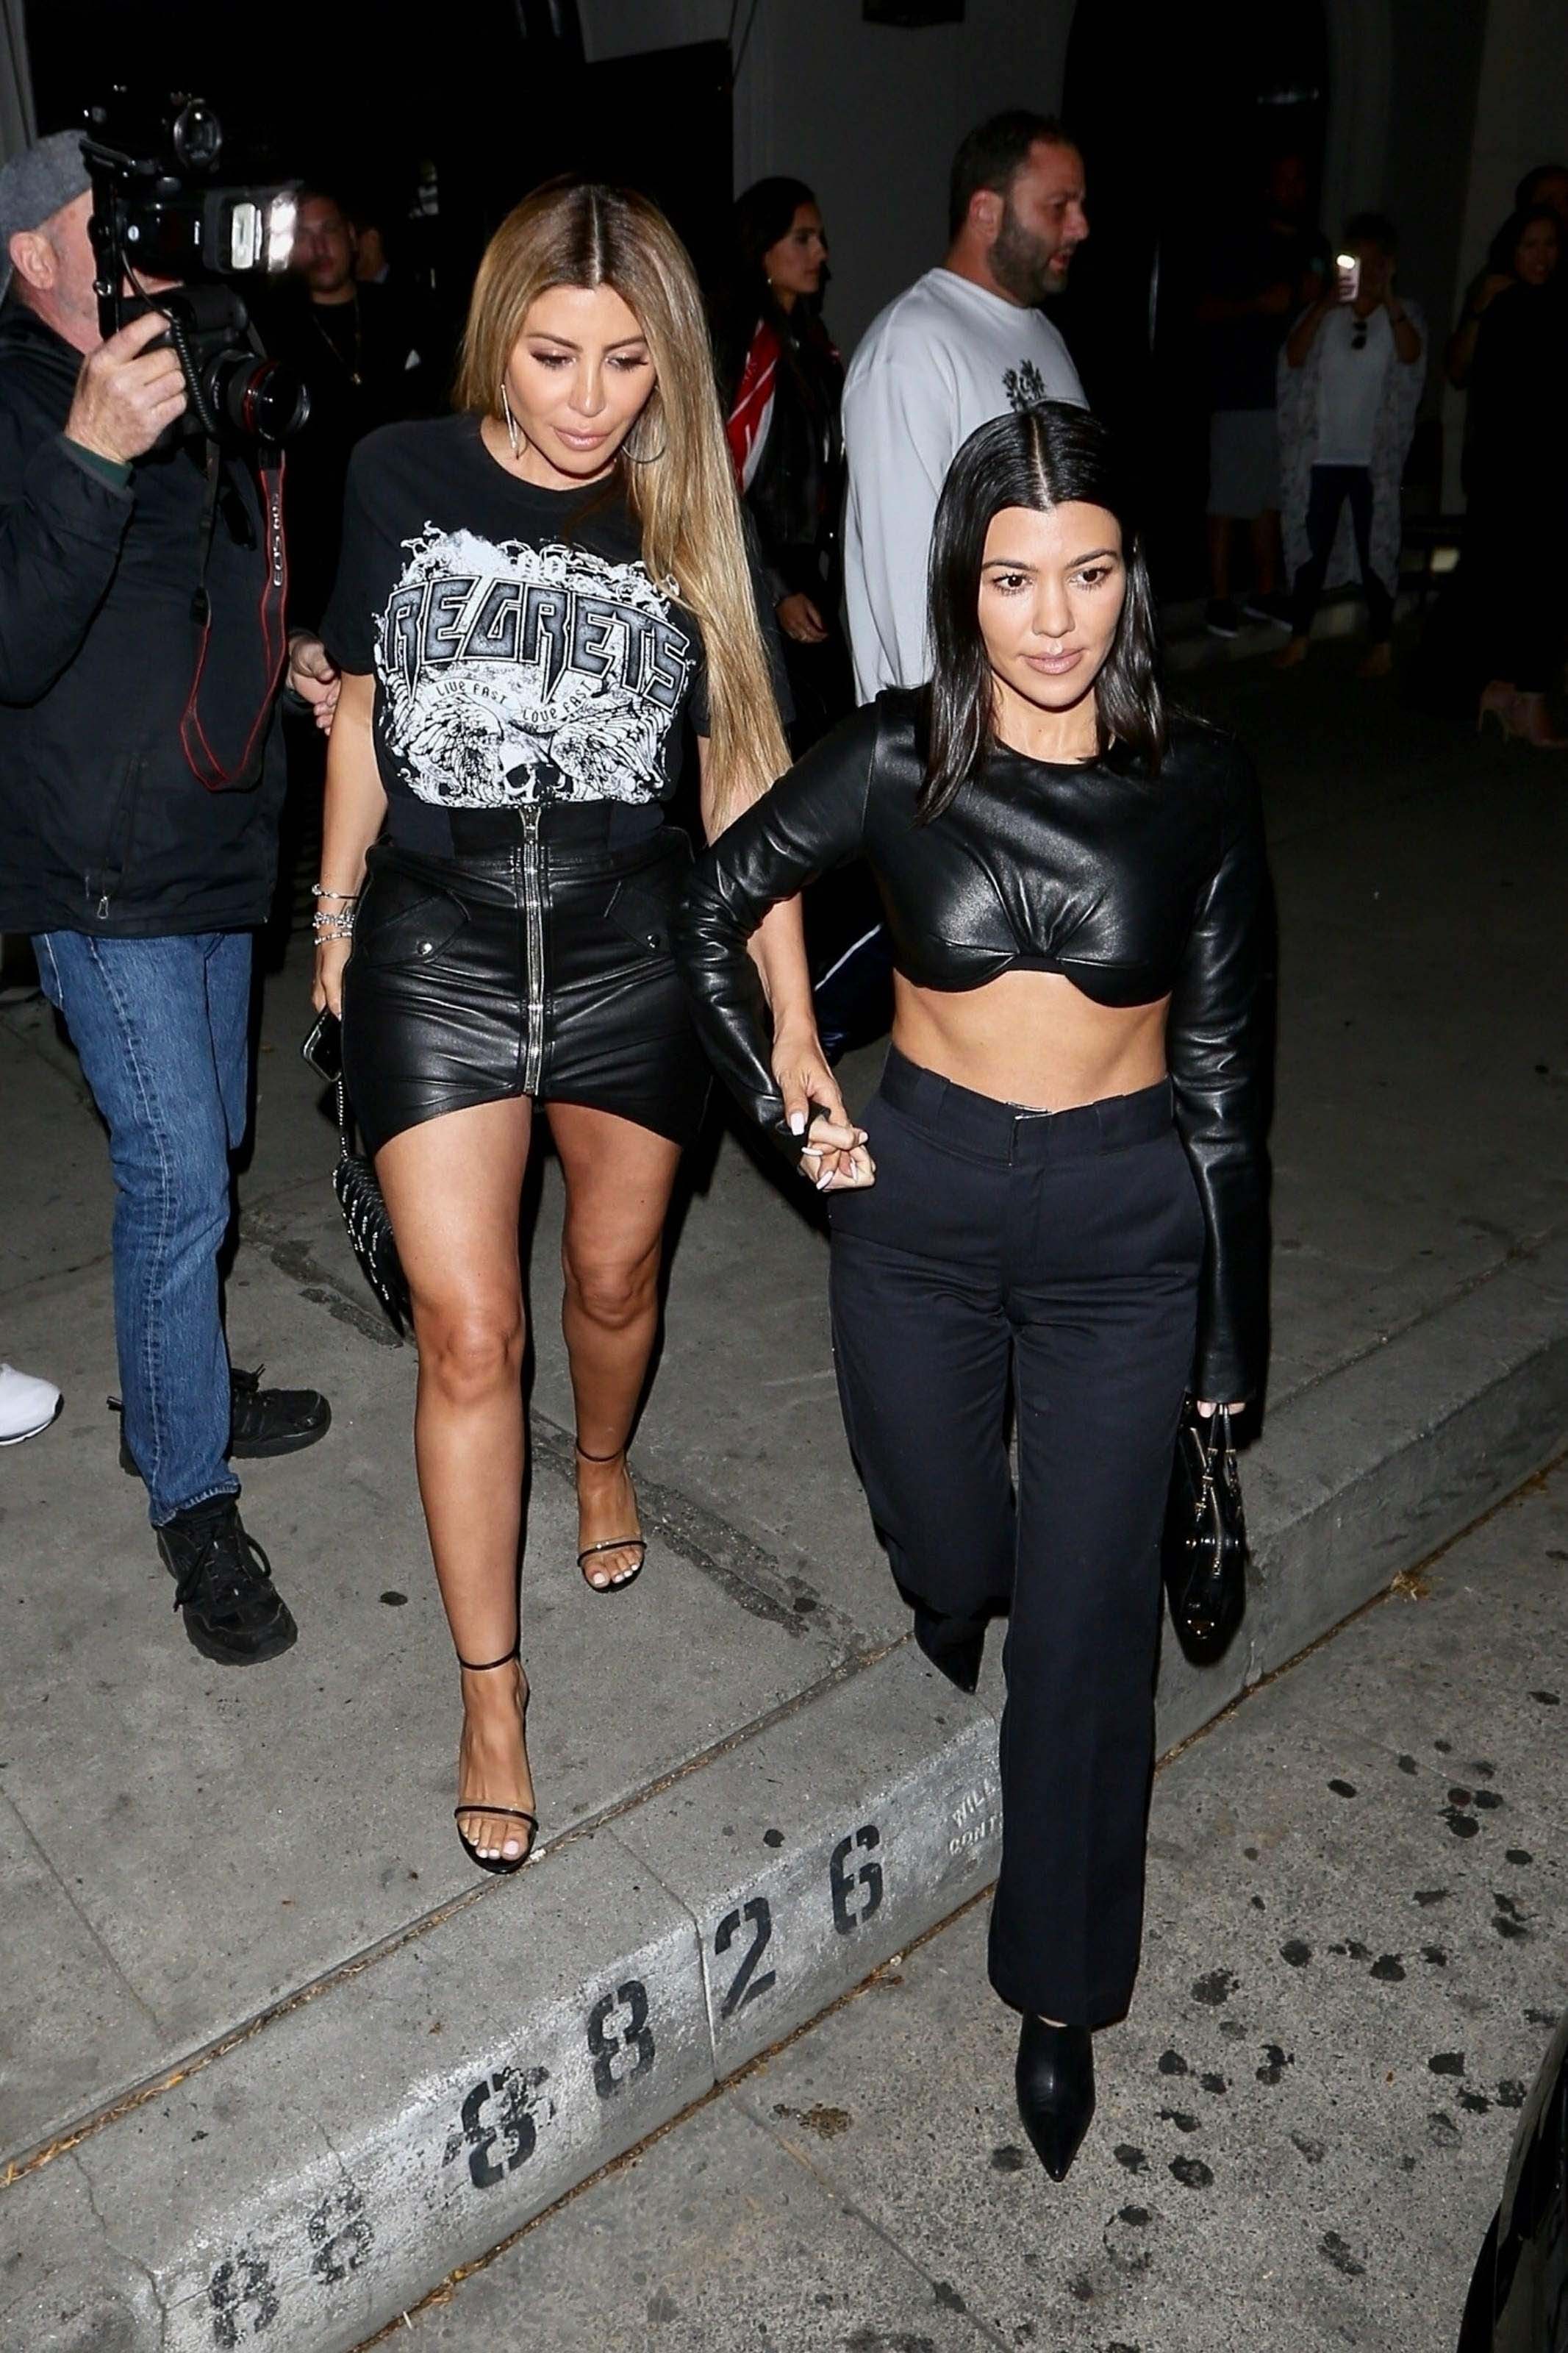 Kourtney Kardashian and Larsa Pippen arrive for a girls night out